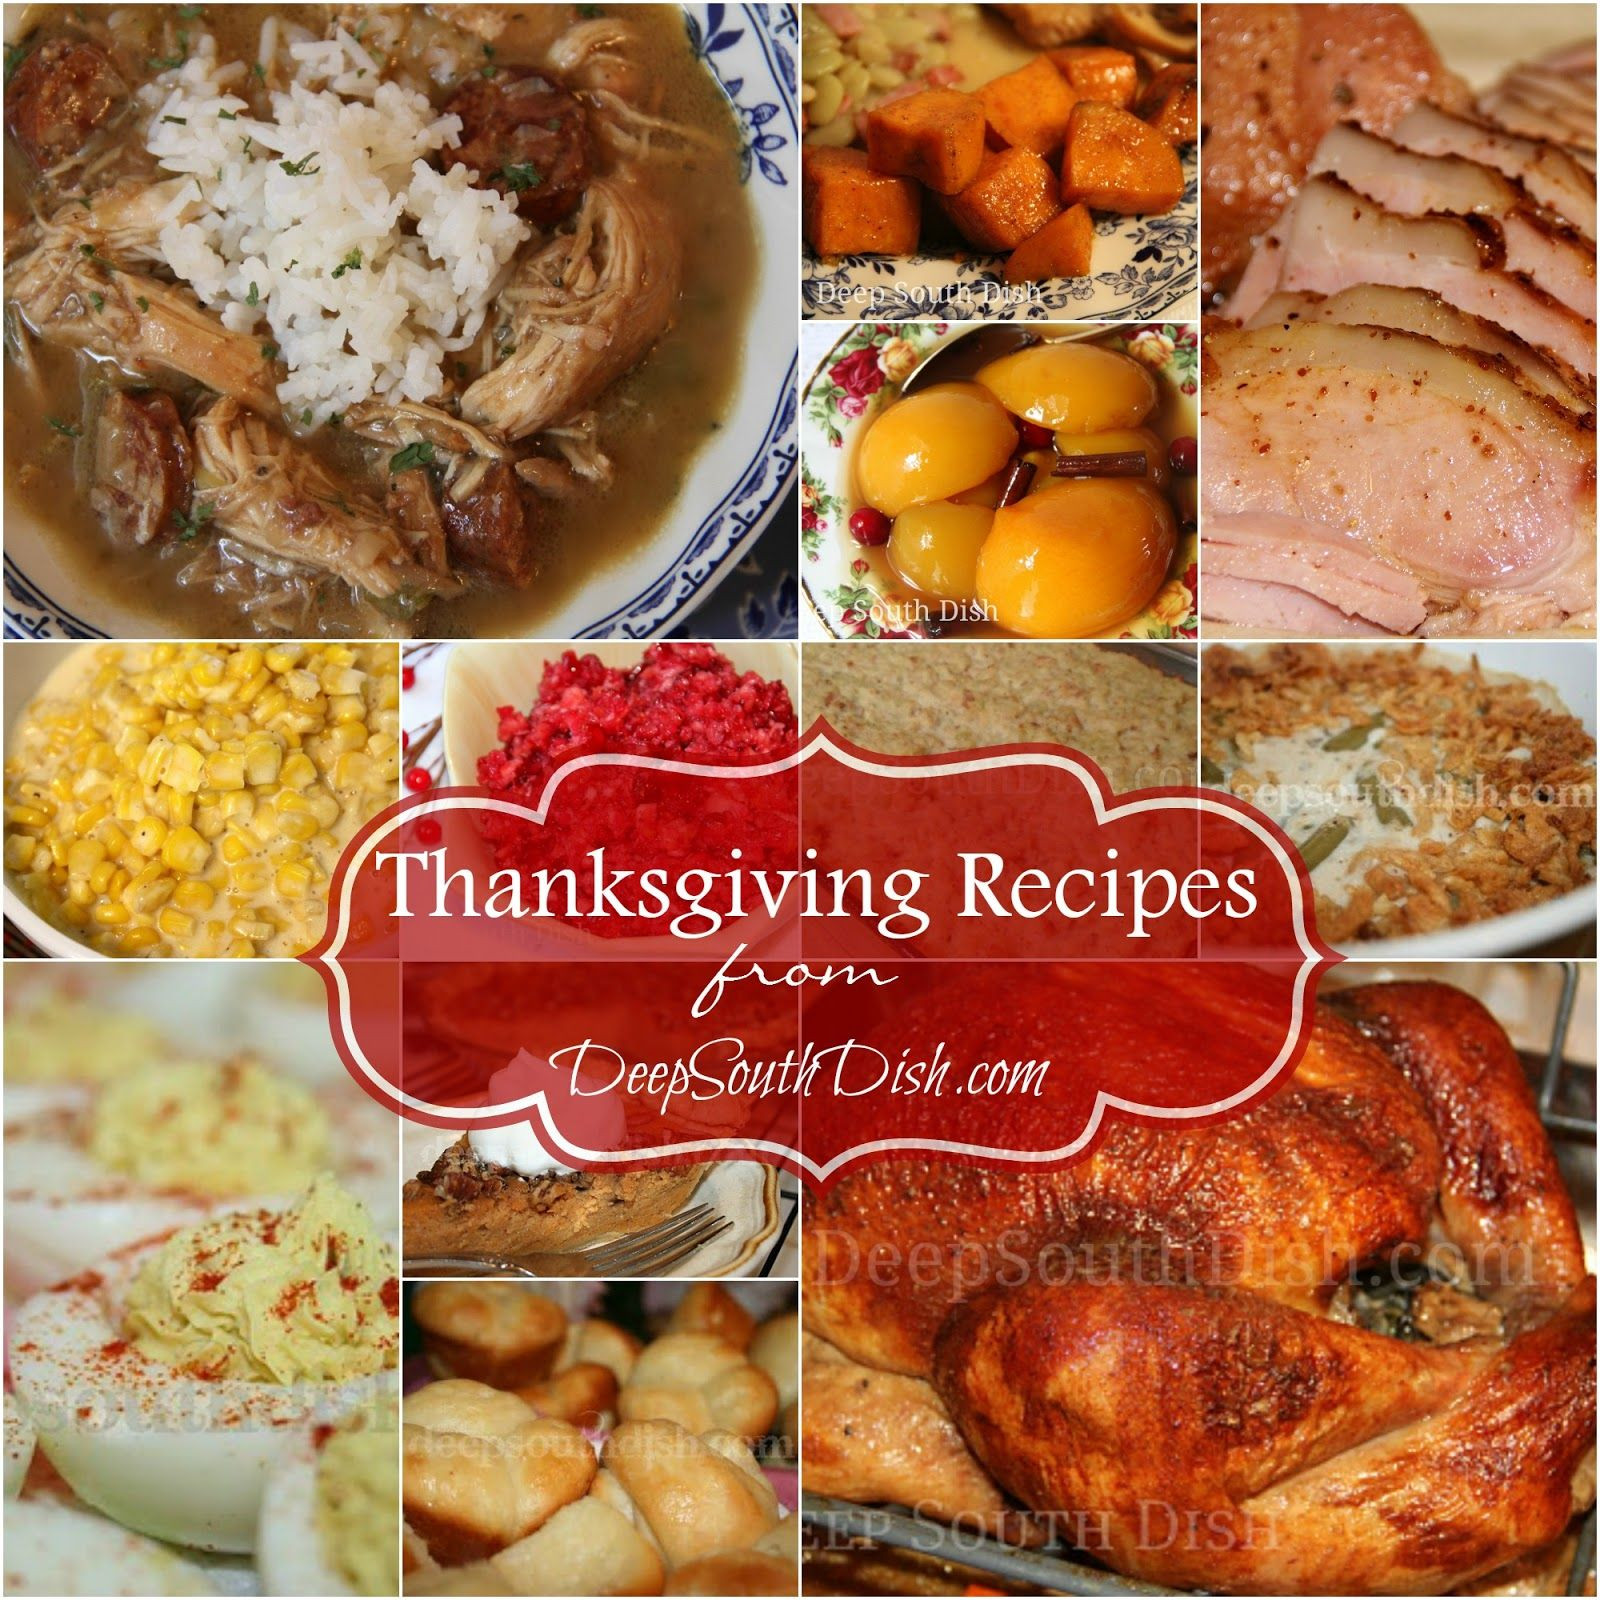 Traditional Southern Thanksgiving Dinner Menu
 Traditional and classic Deep South favorite Southern